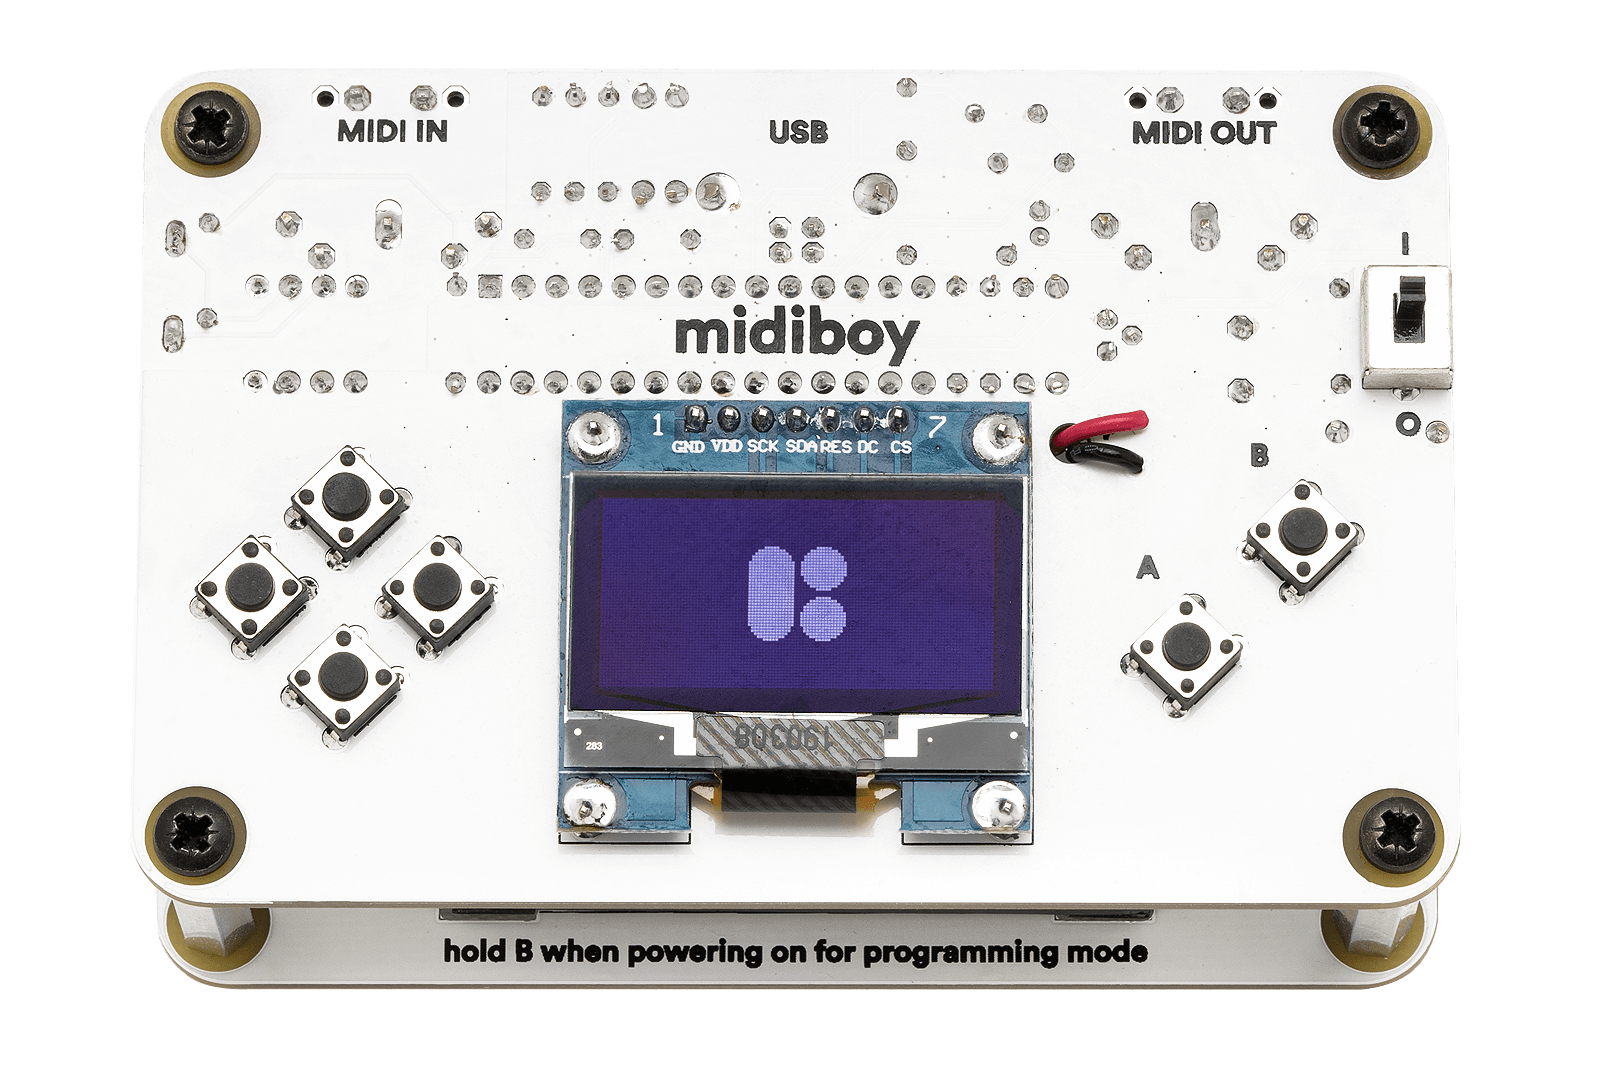 midiboy-front.png